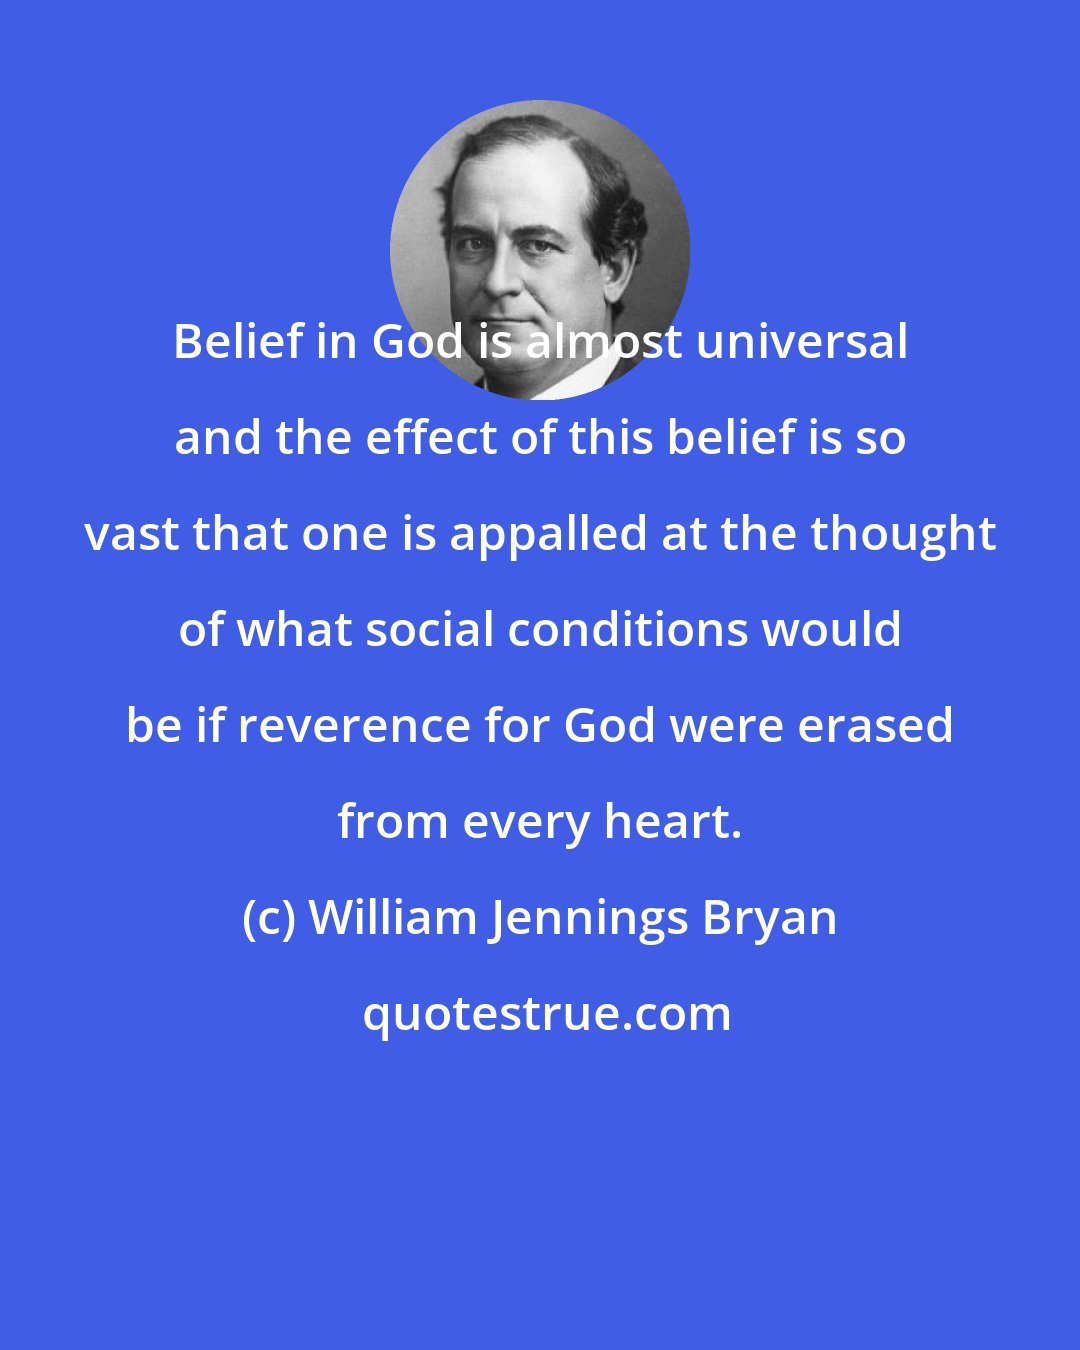 William Jennings Bryan: Belief in God is almost universal and the effect of this belief is so vast that one is appalled at the thought of what social conditions would be if reverence for God were erased from every heart.